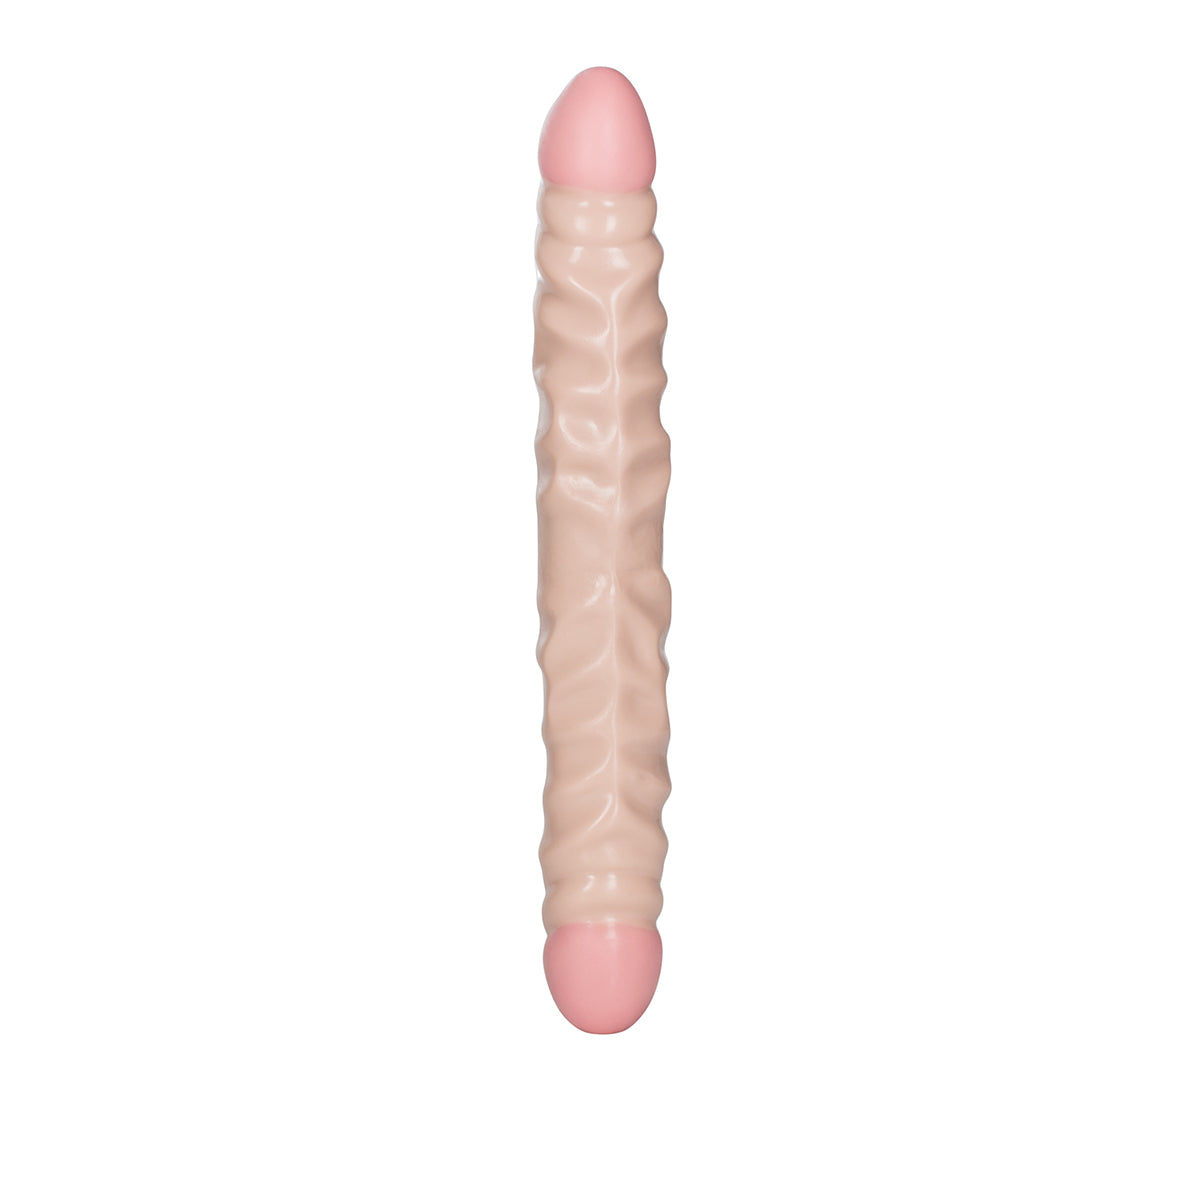 CalExotics Ivory Duo – Veined Double Ended Dong